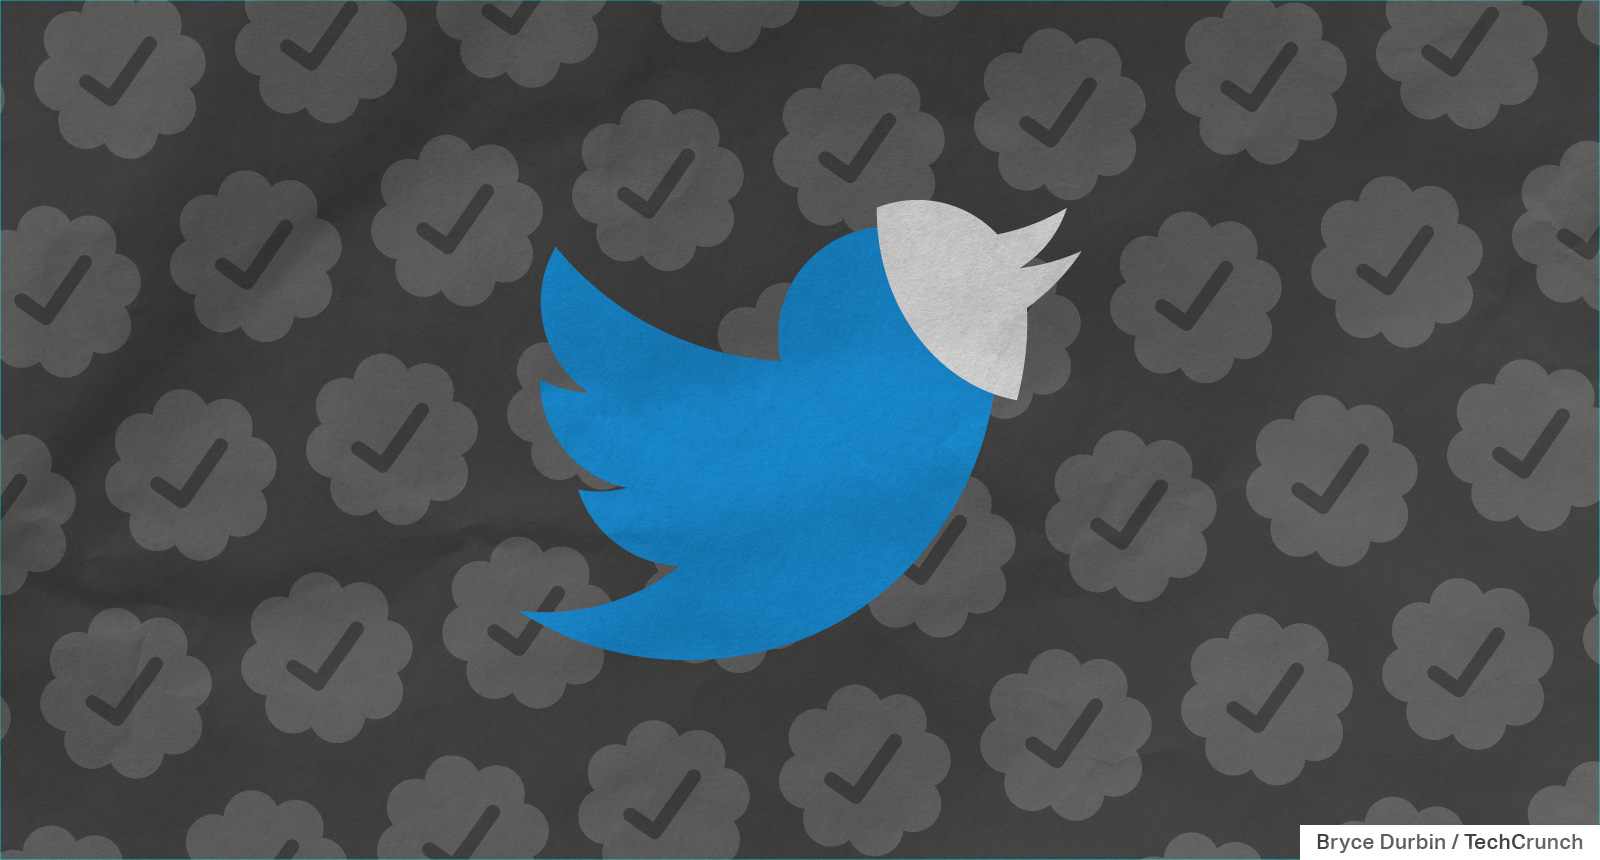 Twitter’s third-party client issue is seemingly a deliberate suspension